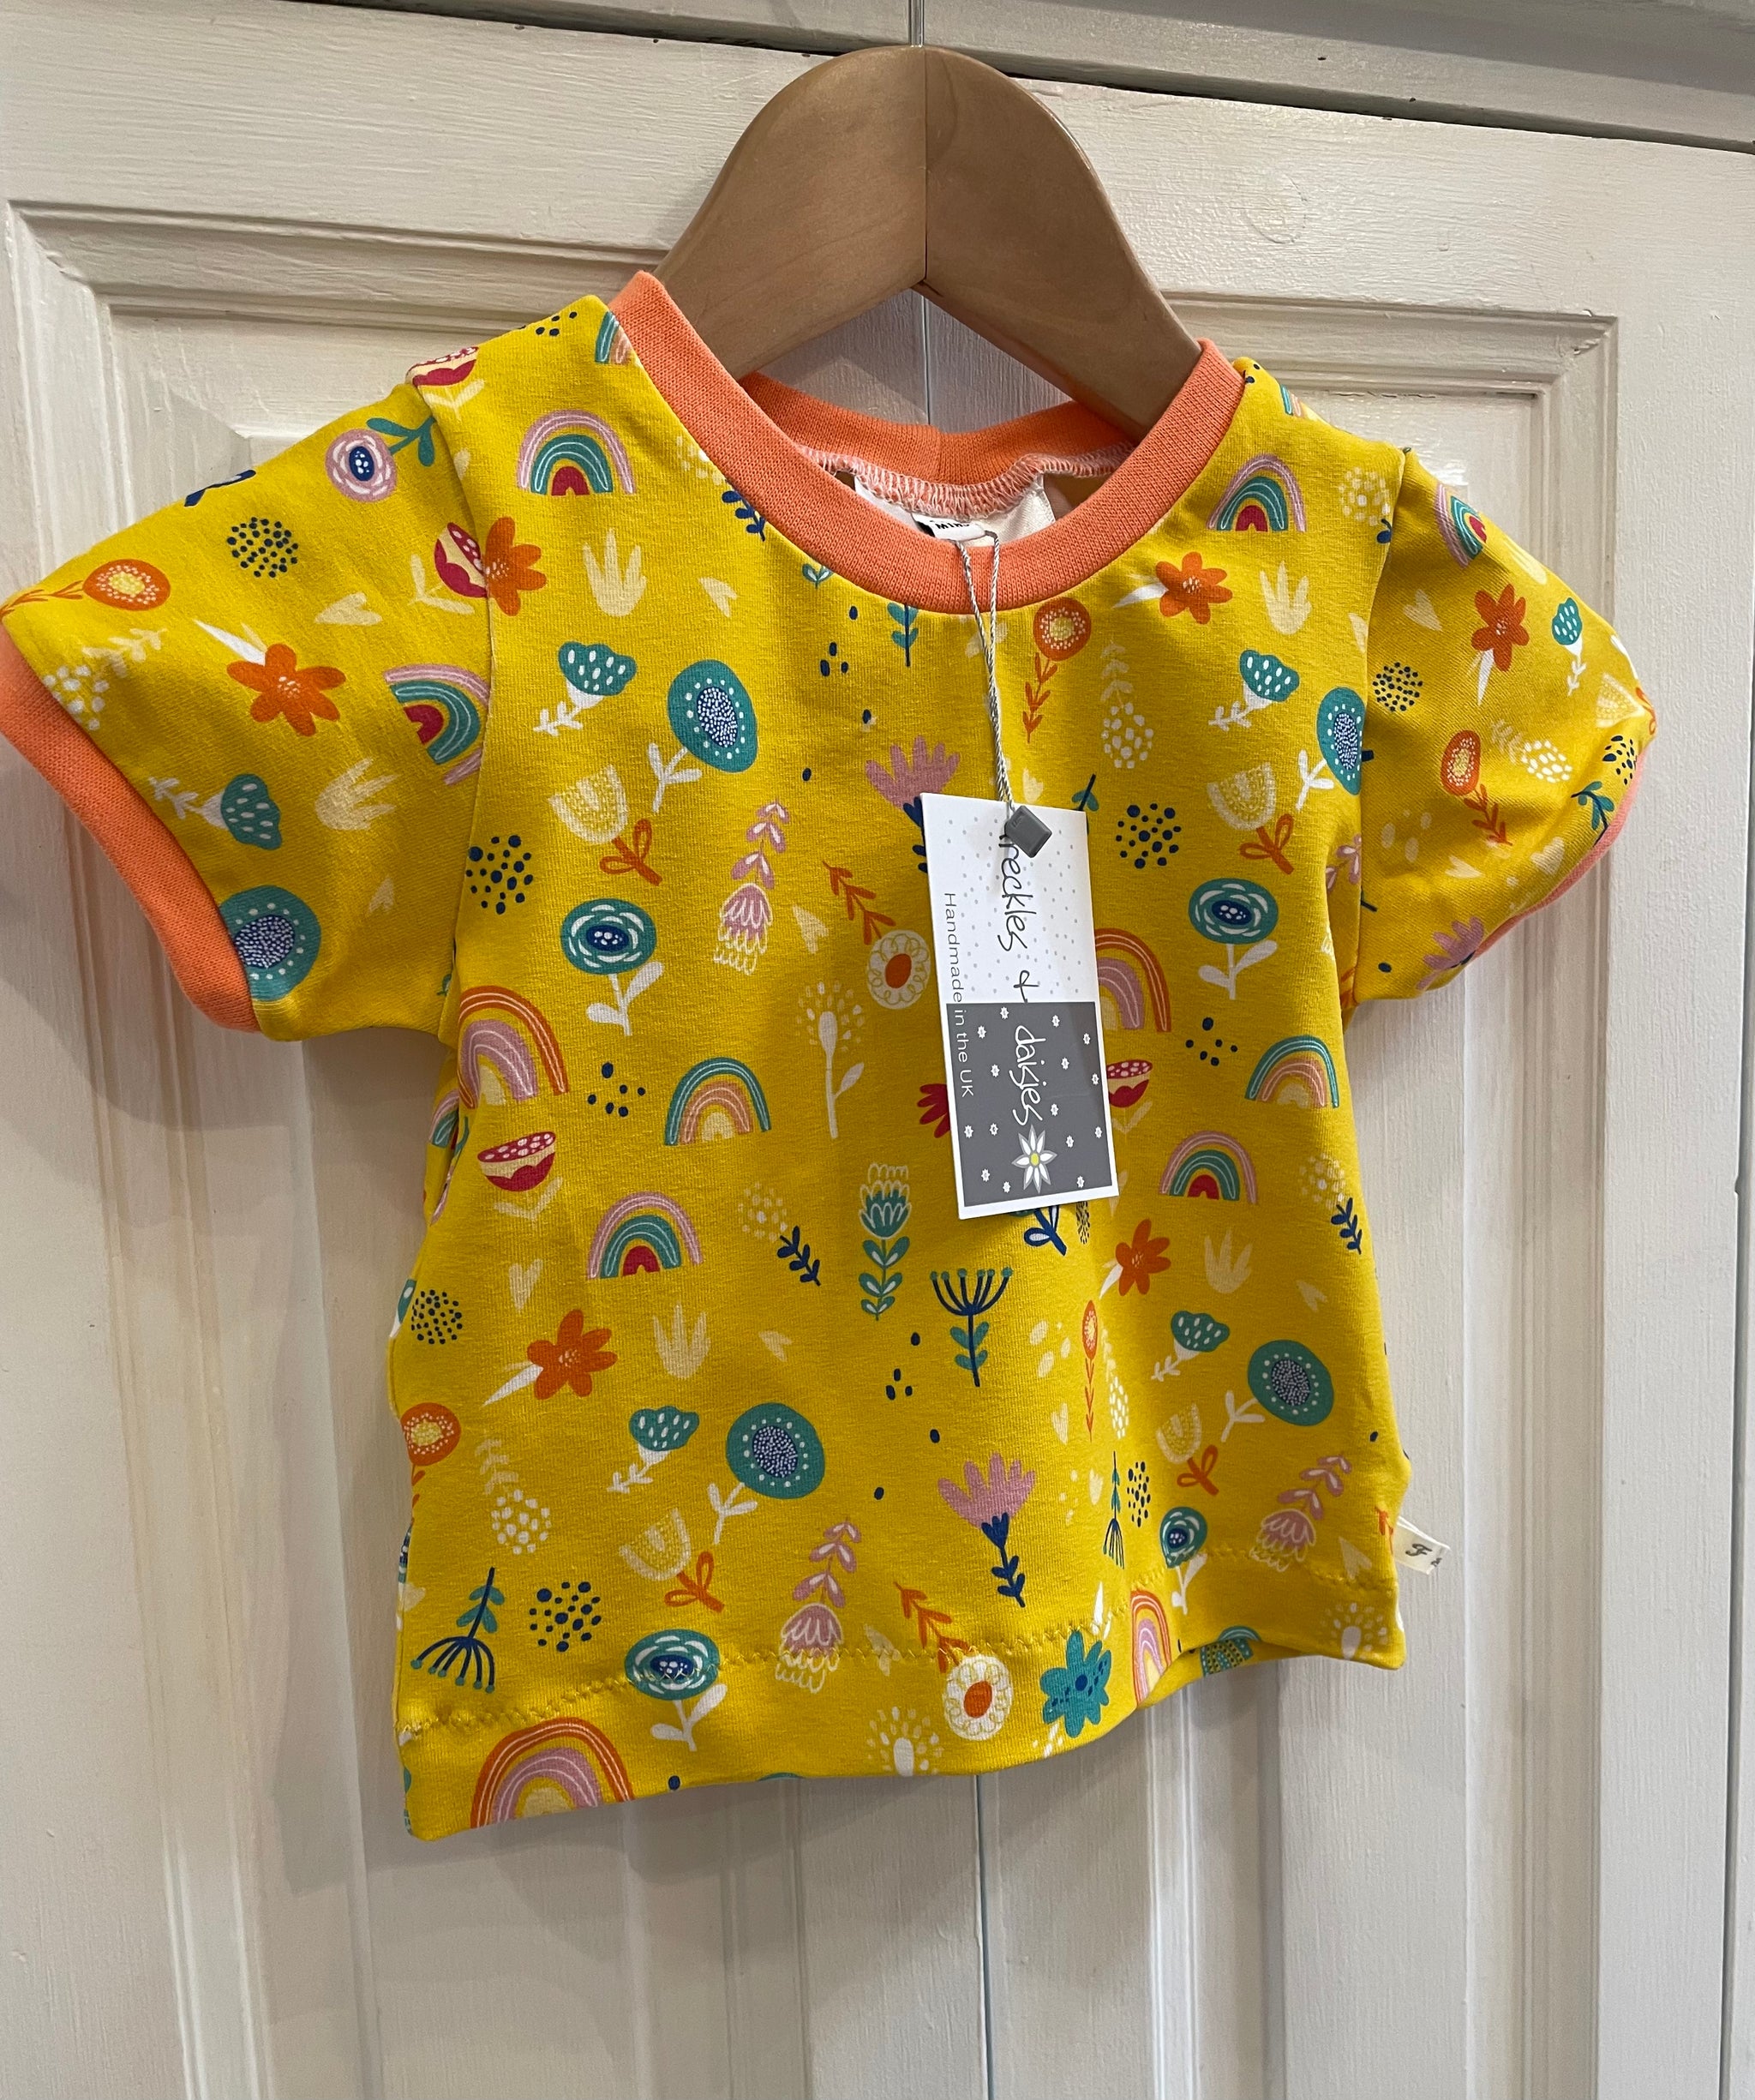 SALE Flower Power T-Shirt from Freckles & Daisies